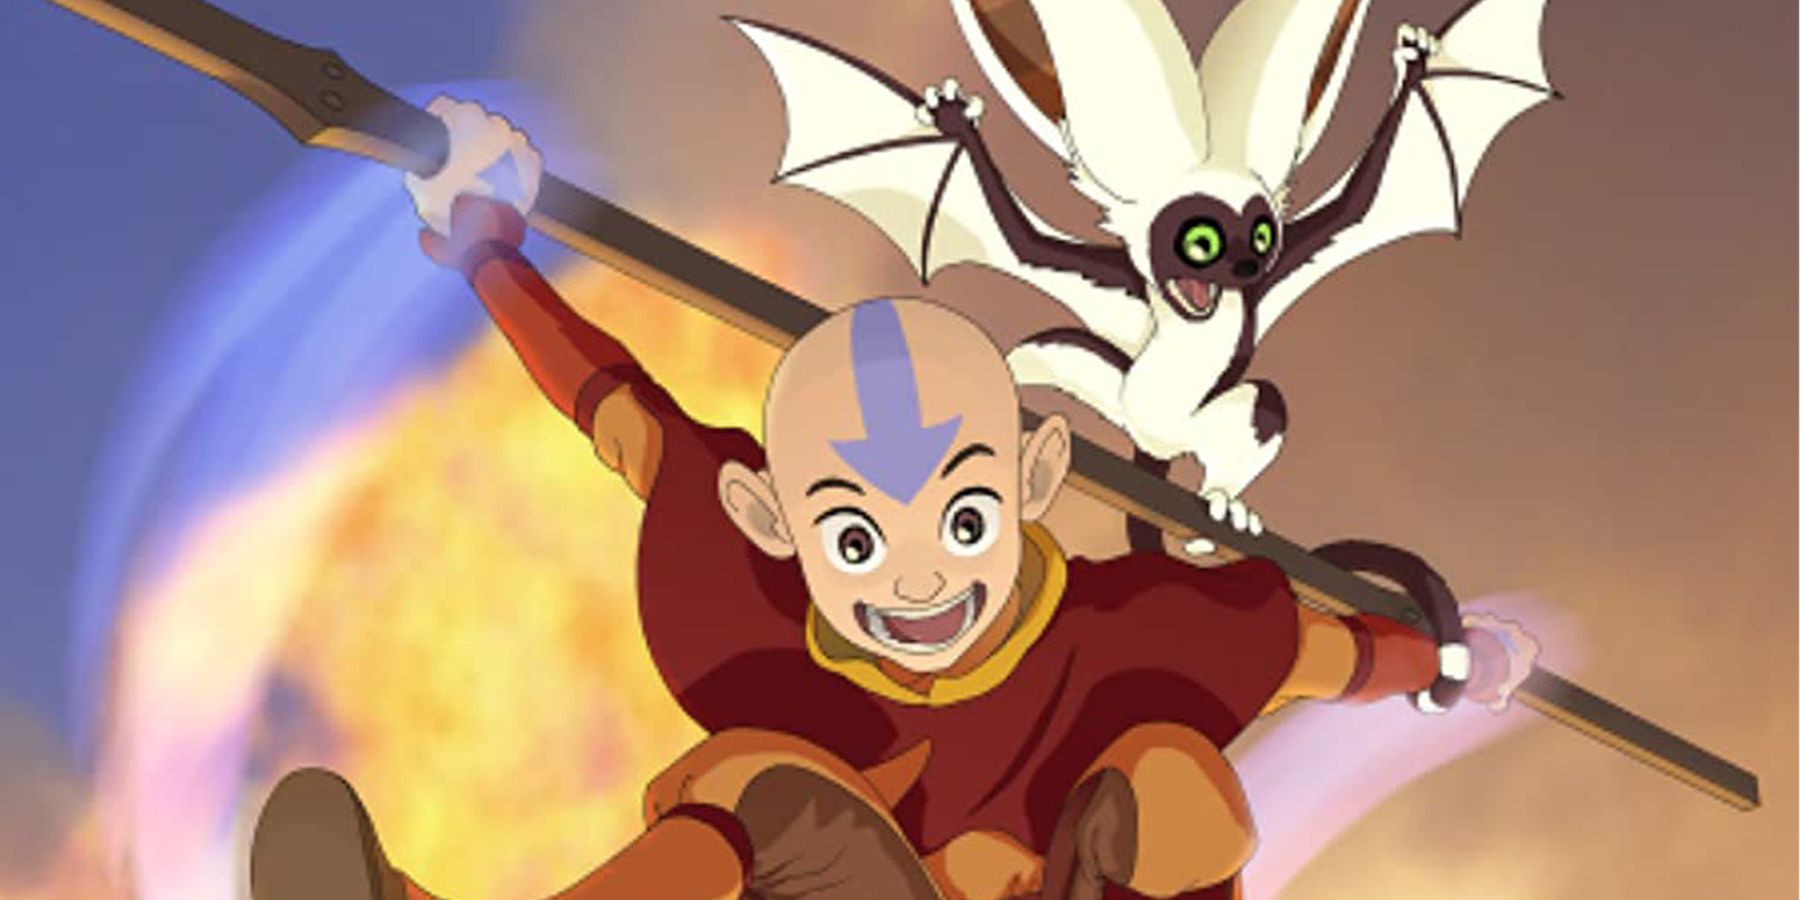 Avatar The Last Airbender Creators Drop Out of Netflix Version  IGN News   IGN